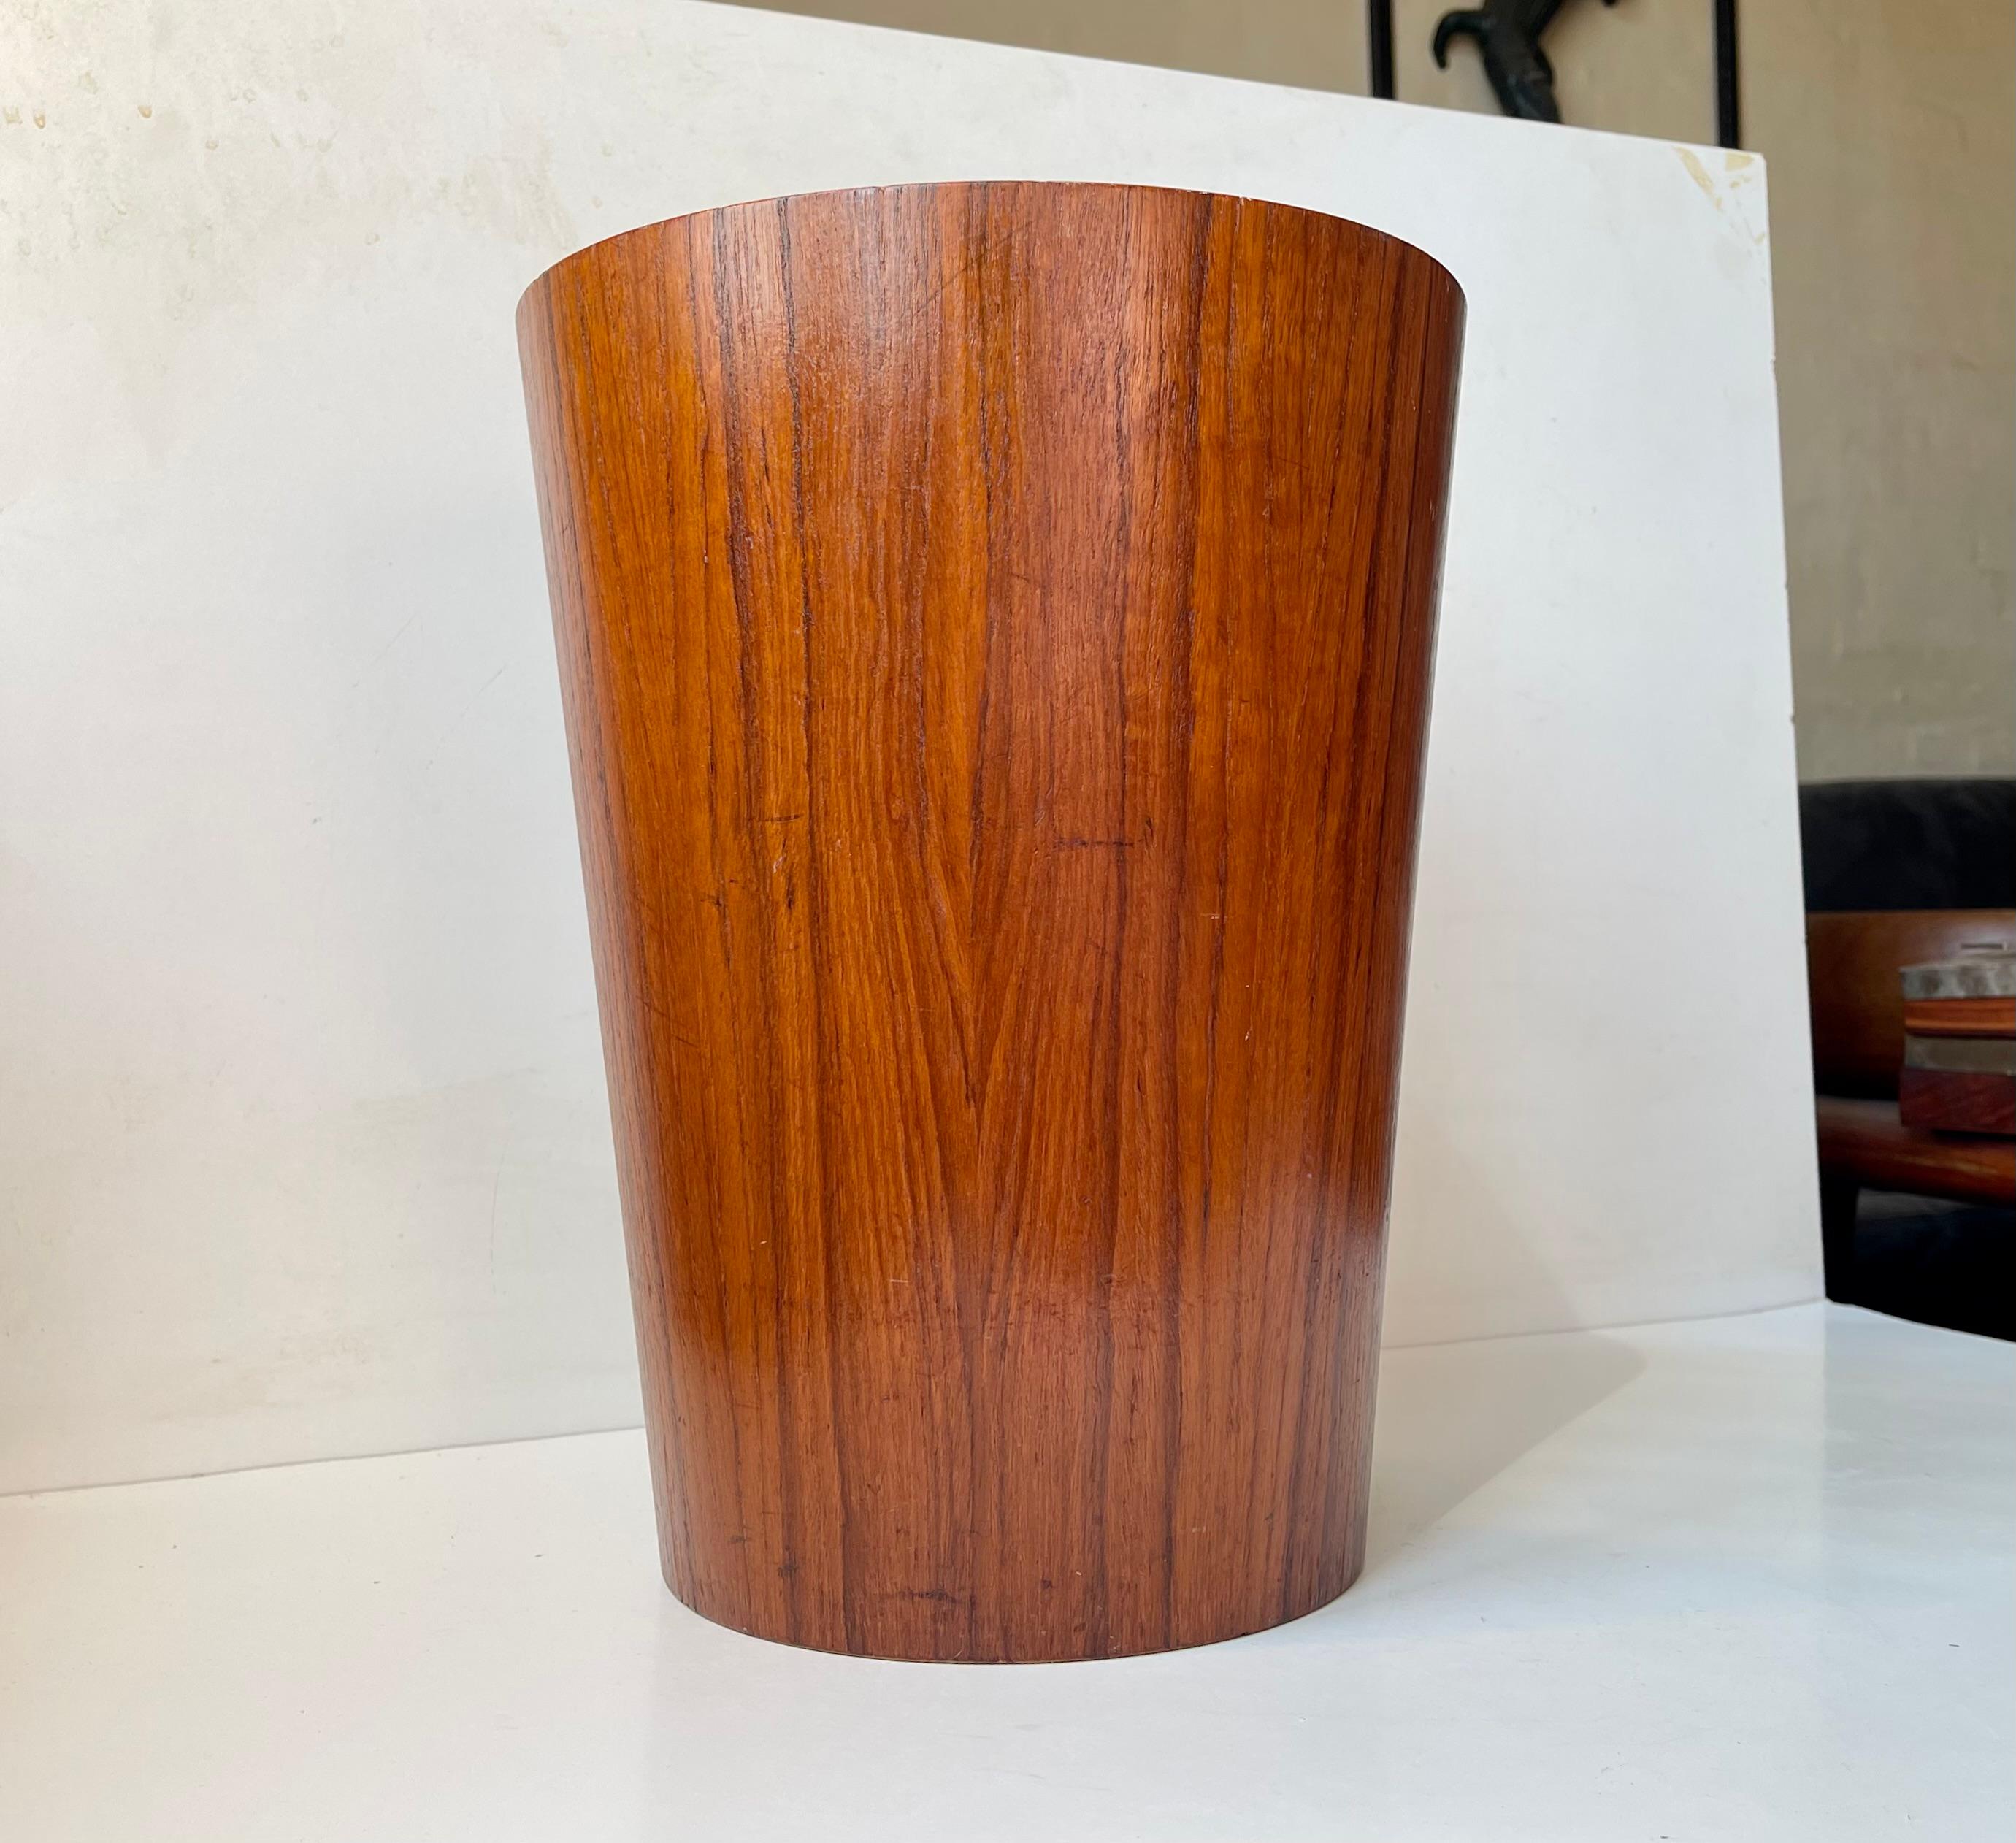 
Mid-Century Modern circular teak waste basket designed by Martin Åberg for the Swedish company Servex in 1955. It features birch interior and original makers mark and design number stamped underneath the base. The teak has a beautiful grain and